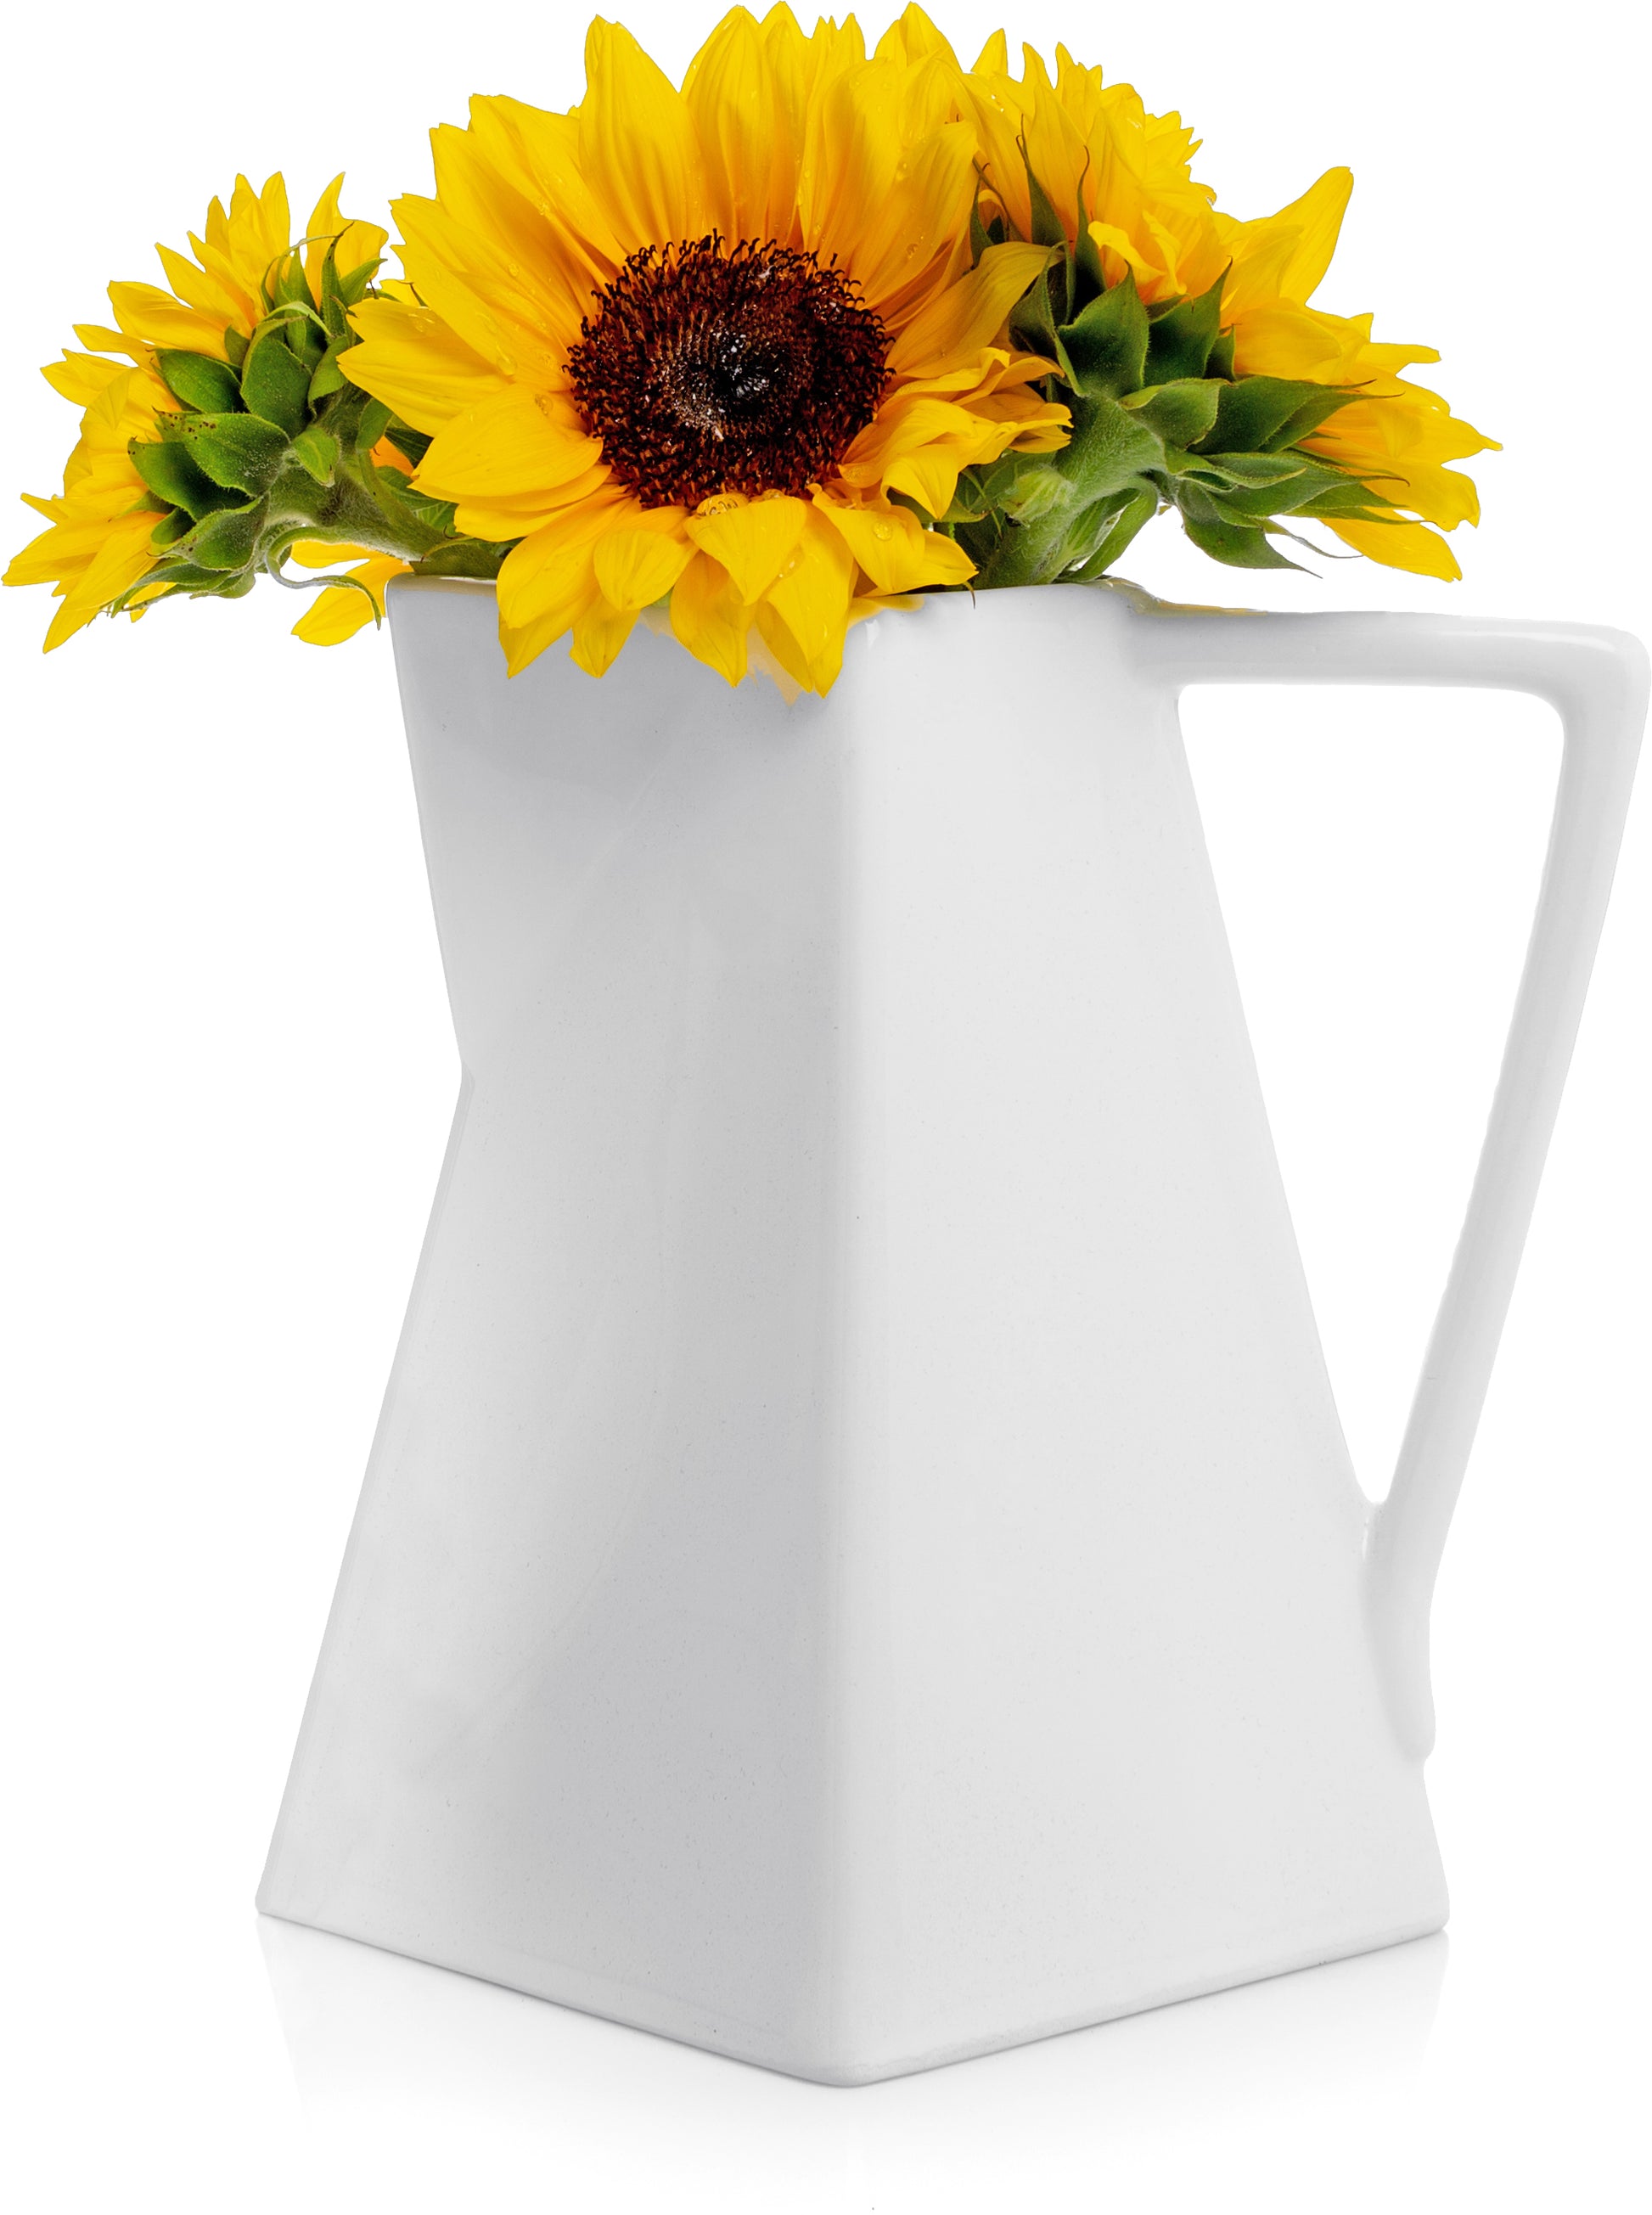 cube shaped pitcher with flowers